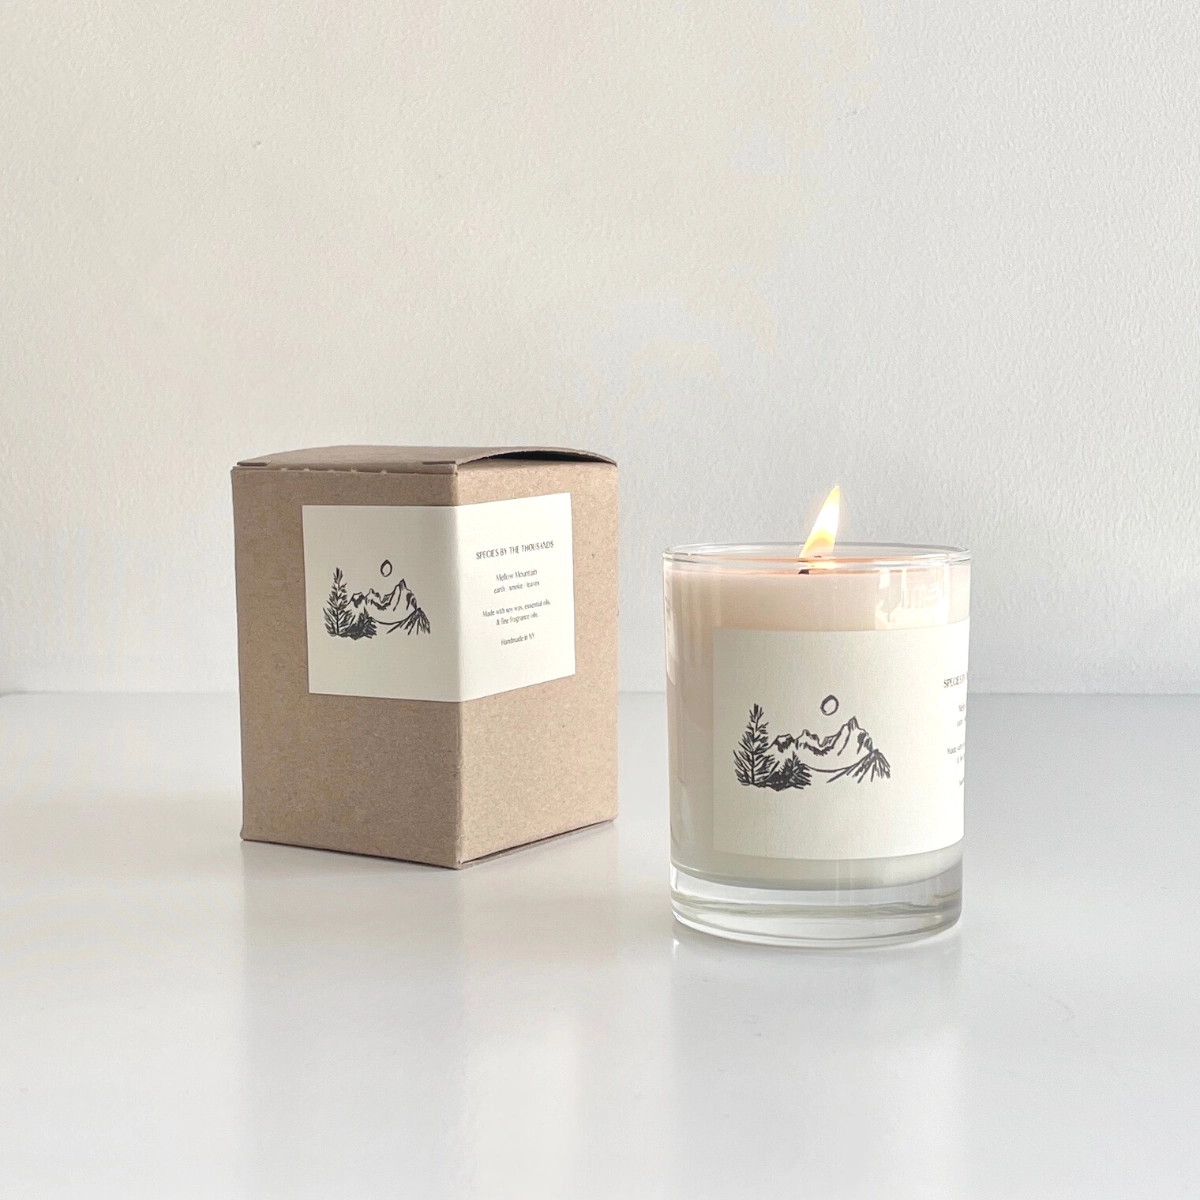 Landscape Series - Mellow Mountain Soy Candle